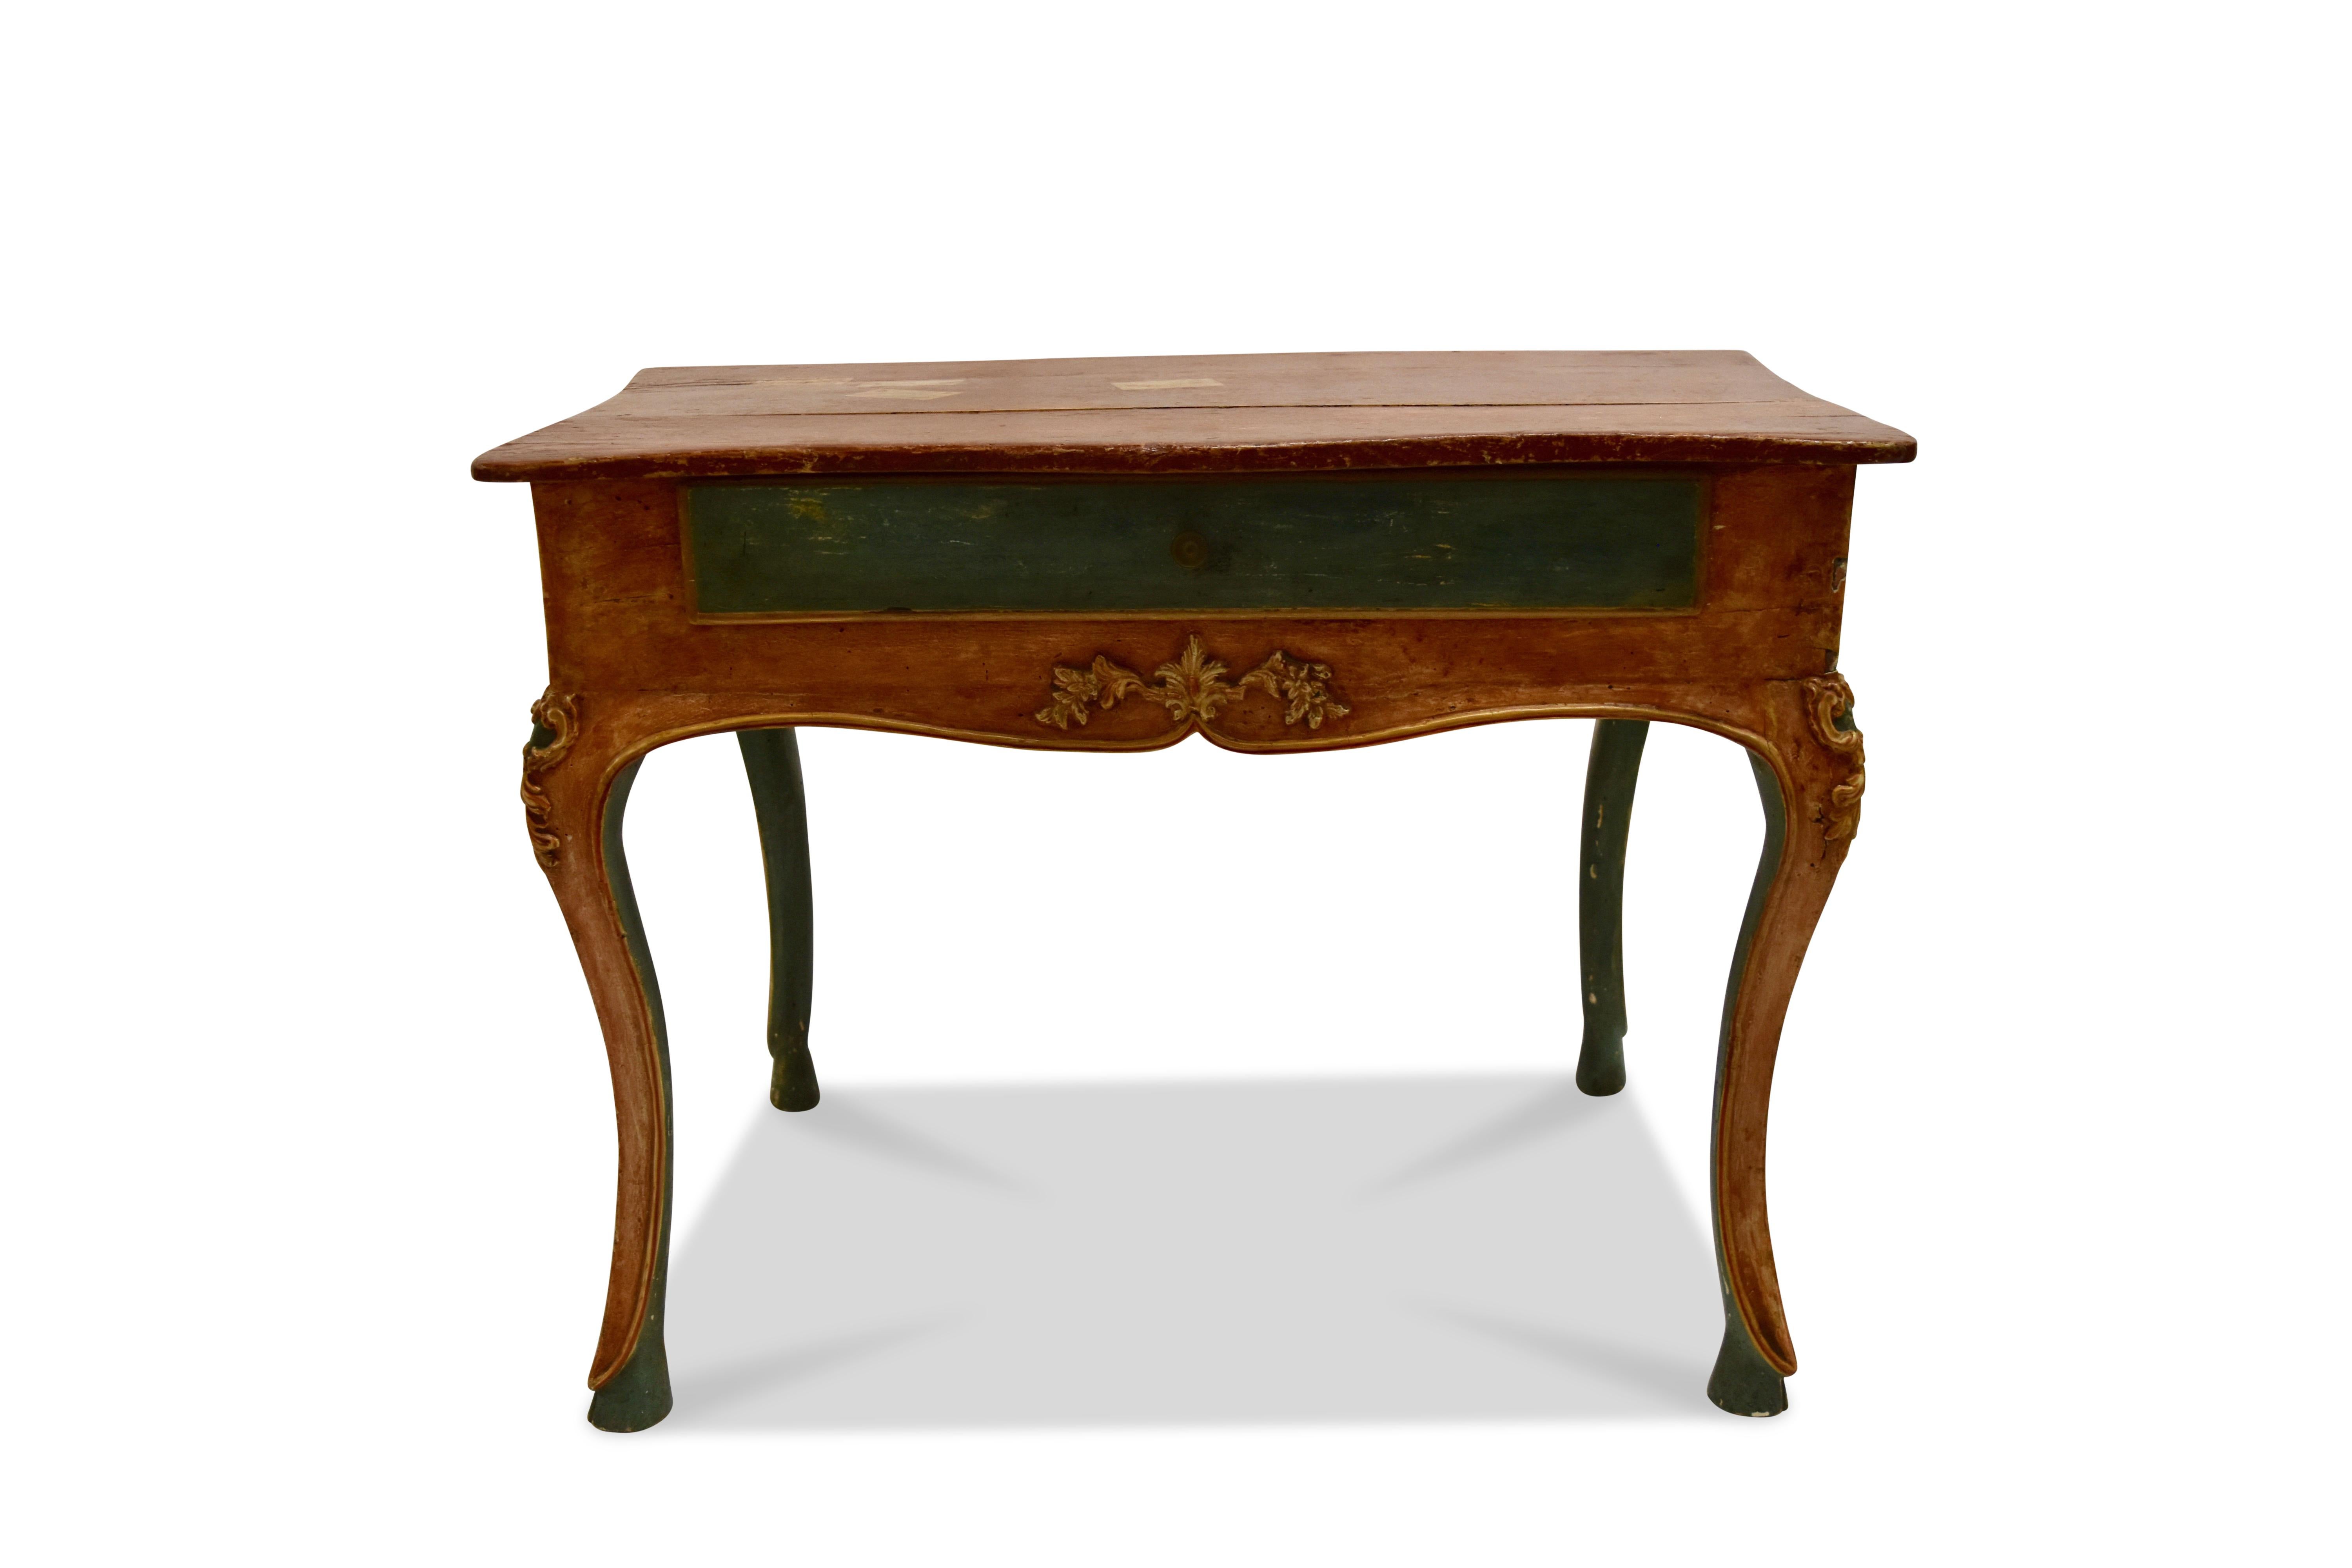 Italian Venetian single drawer console table with trompe l'oeil detail over cabriole leg